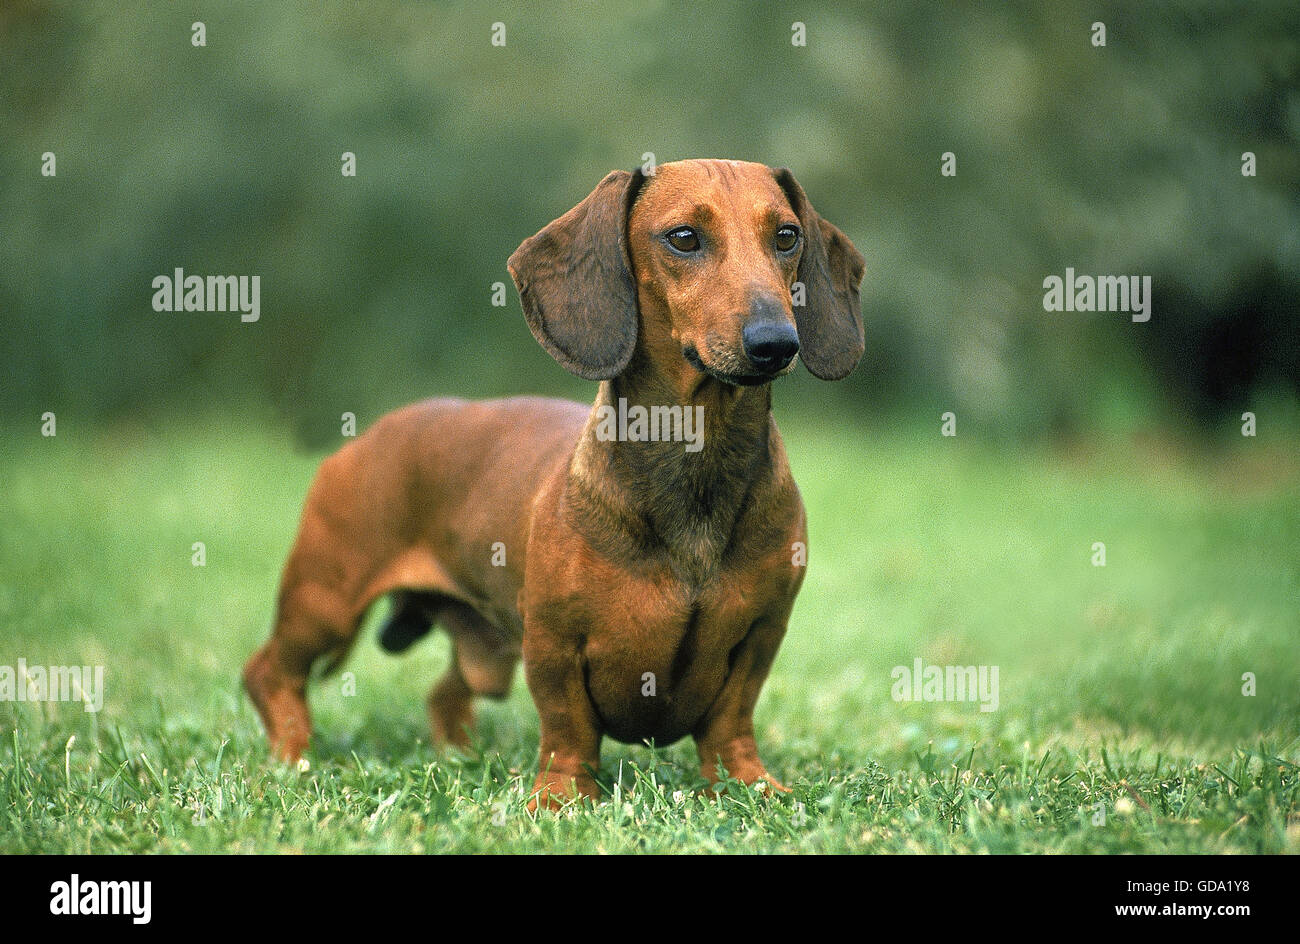 SMOOTH-HAIRED DACHSHUND, MALE STANDING ON GRASS Stock Photo